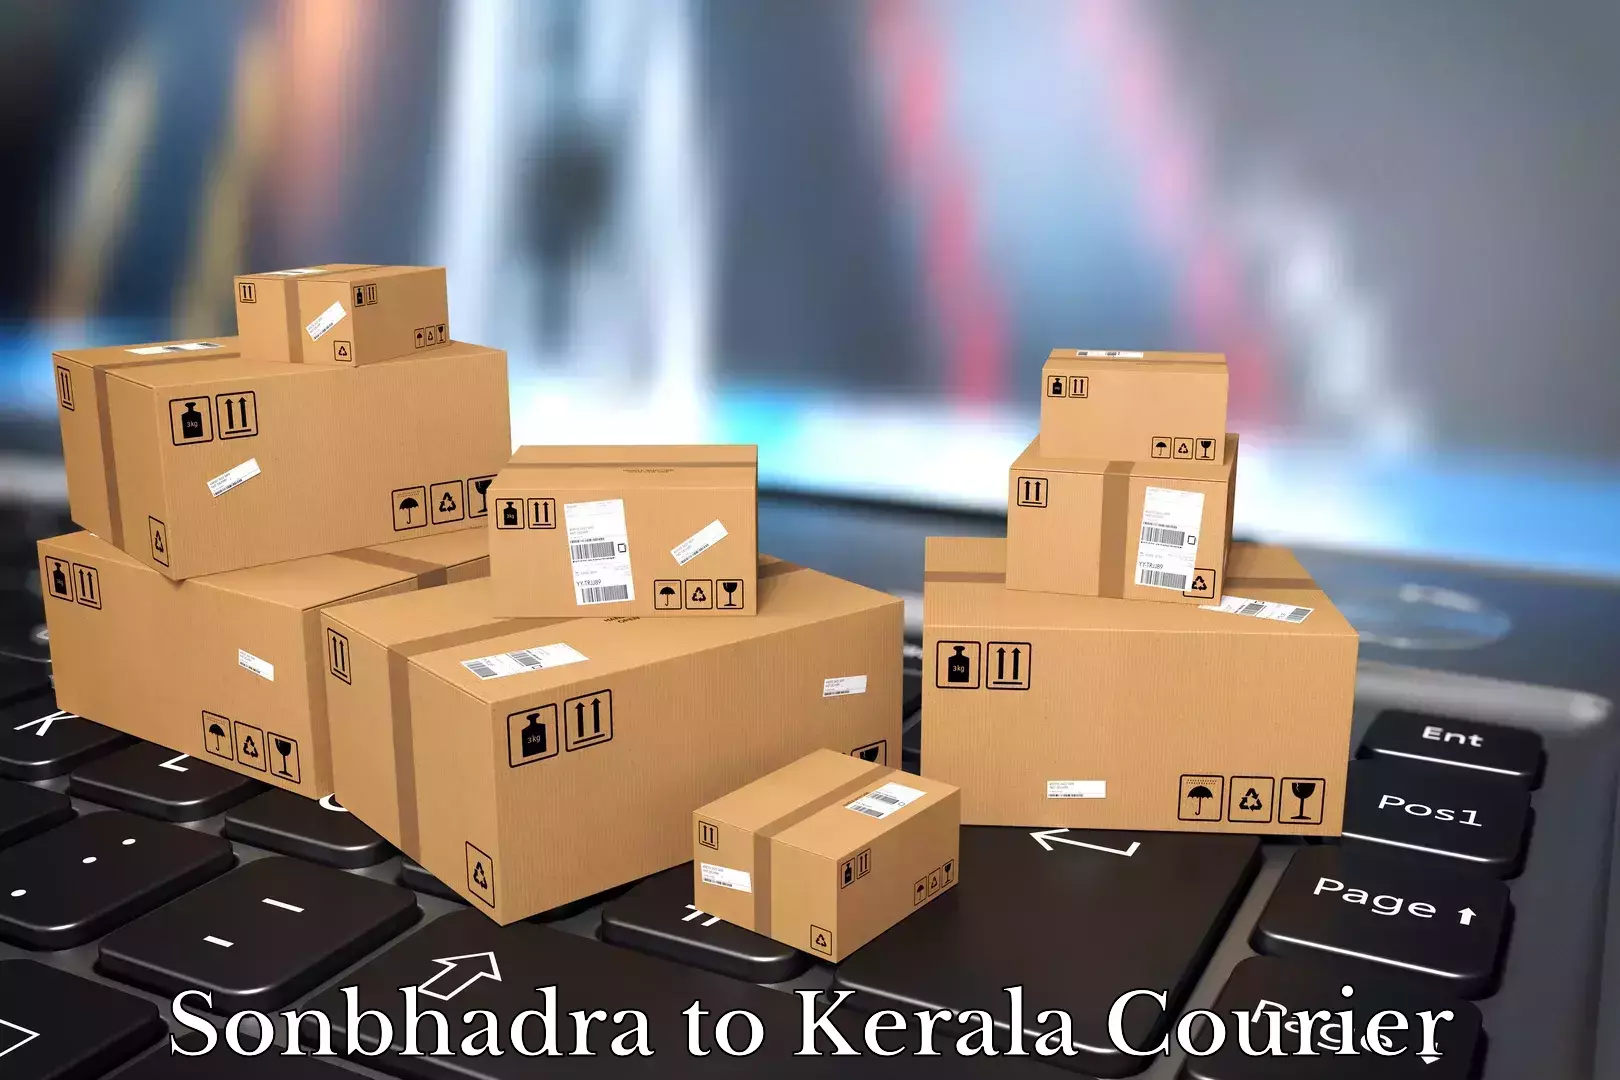 Professional moving company in Sonbhadra to Kozhikode